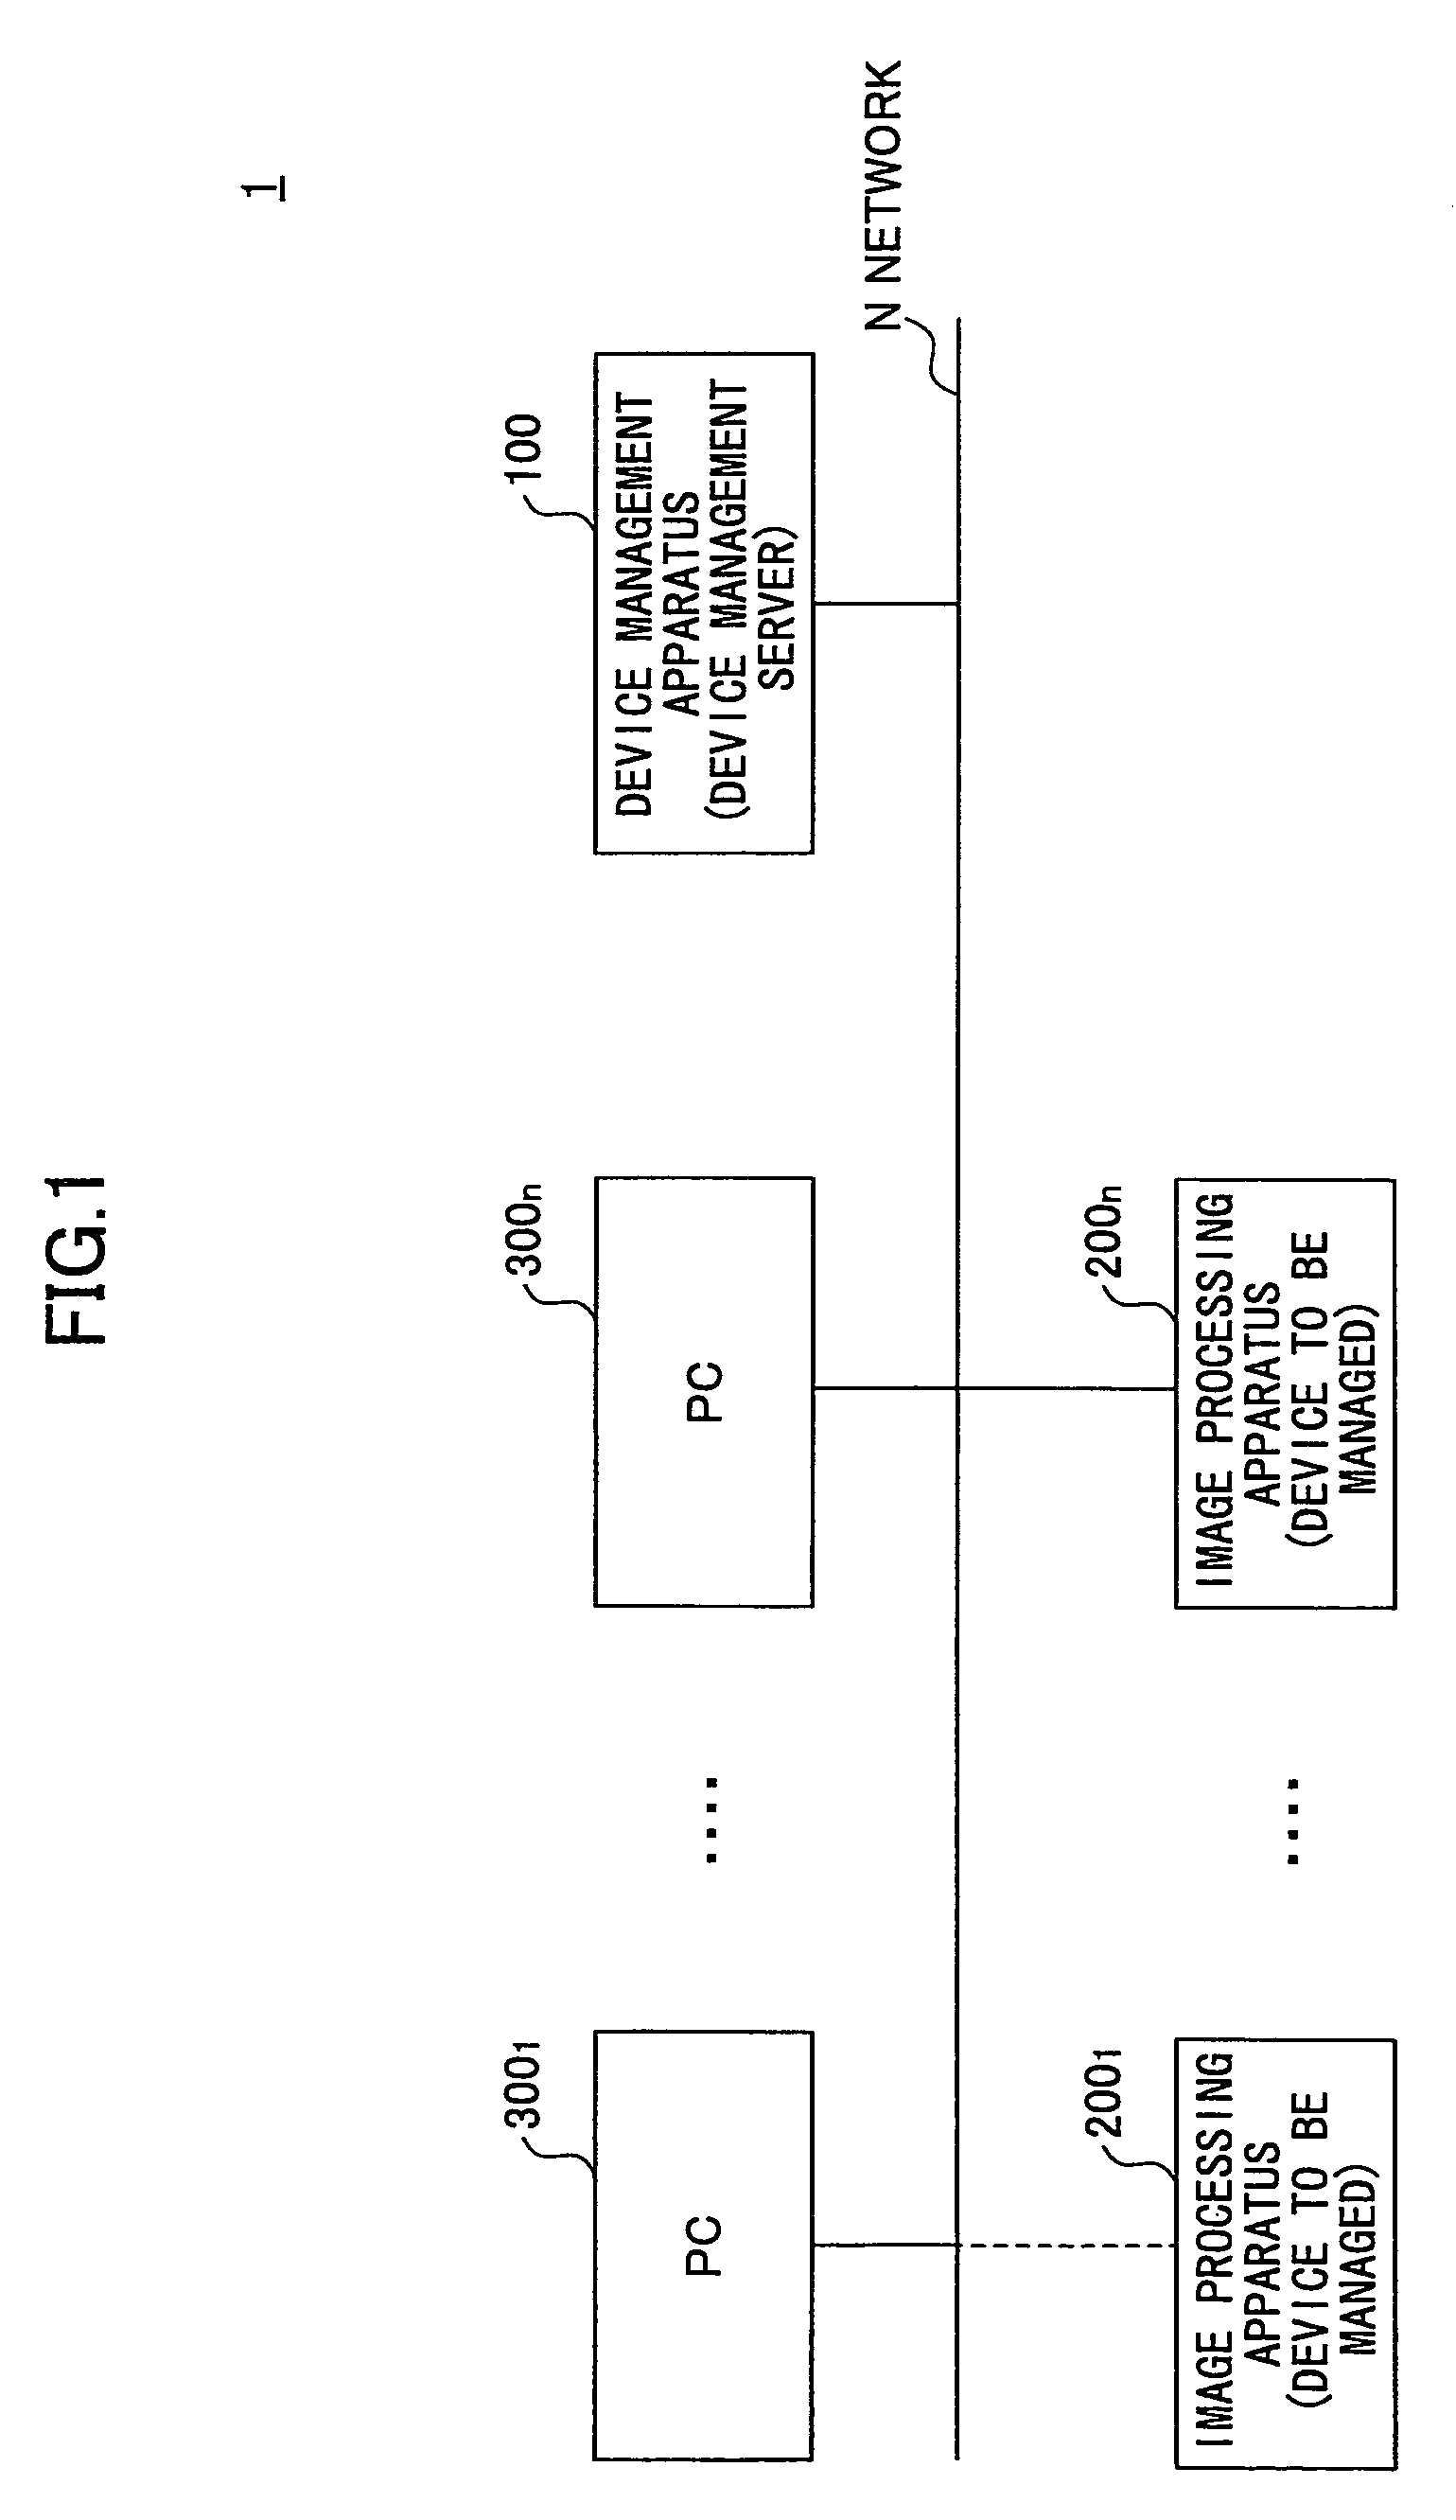 Device management apparatus, device management system, information management method, information management program and recording medium storing the program therein